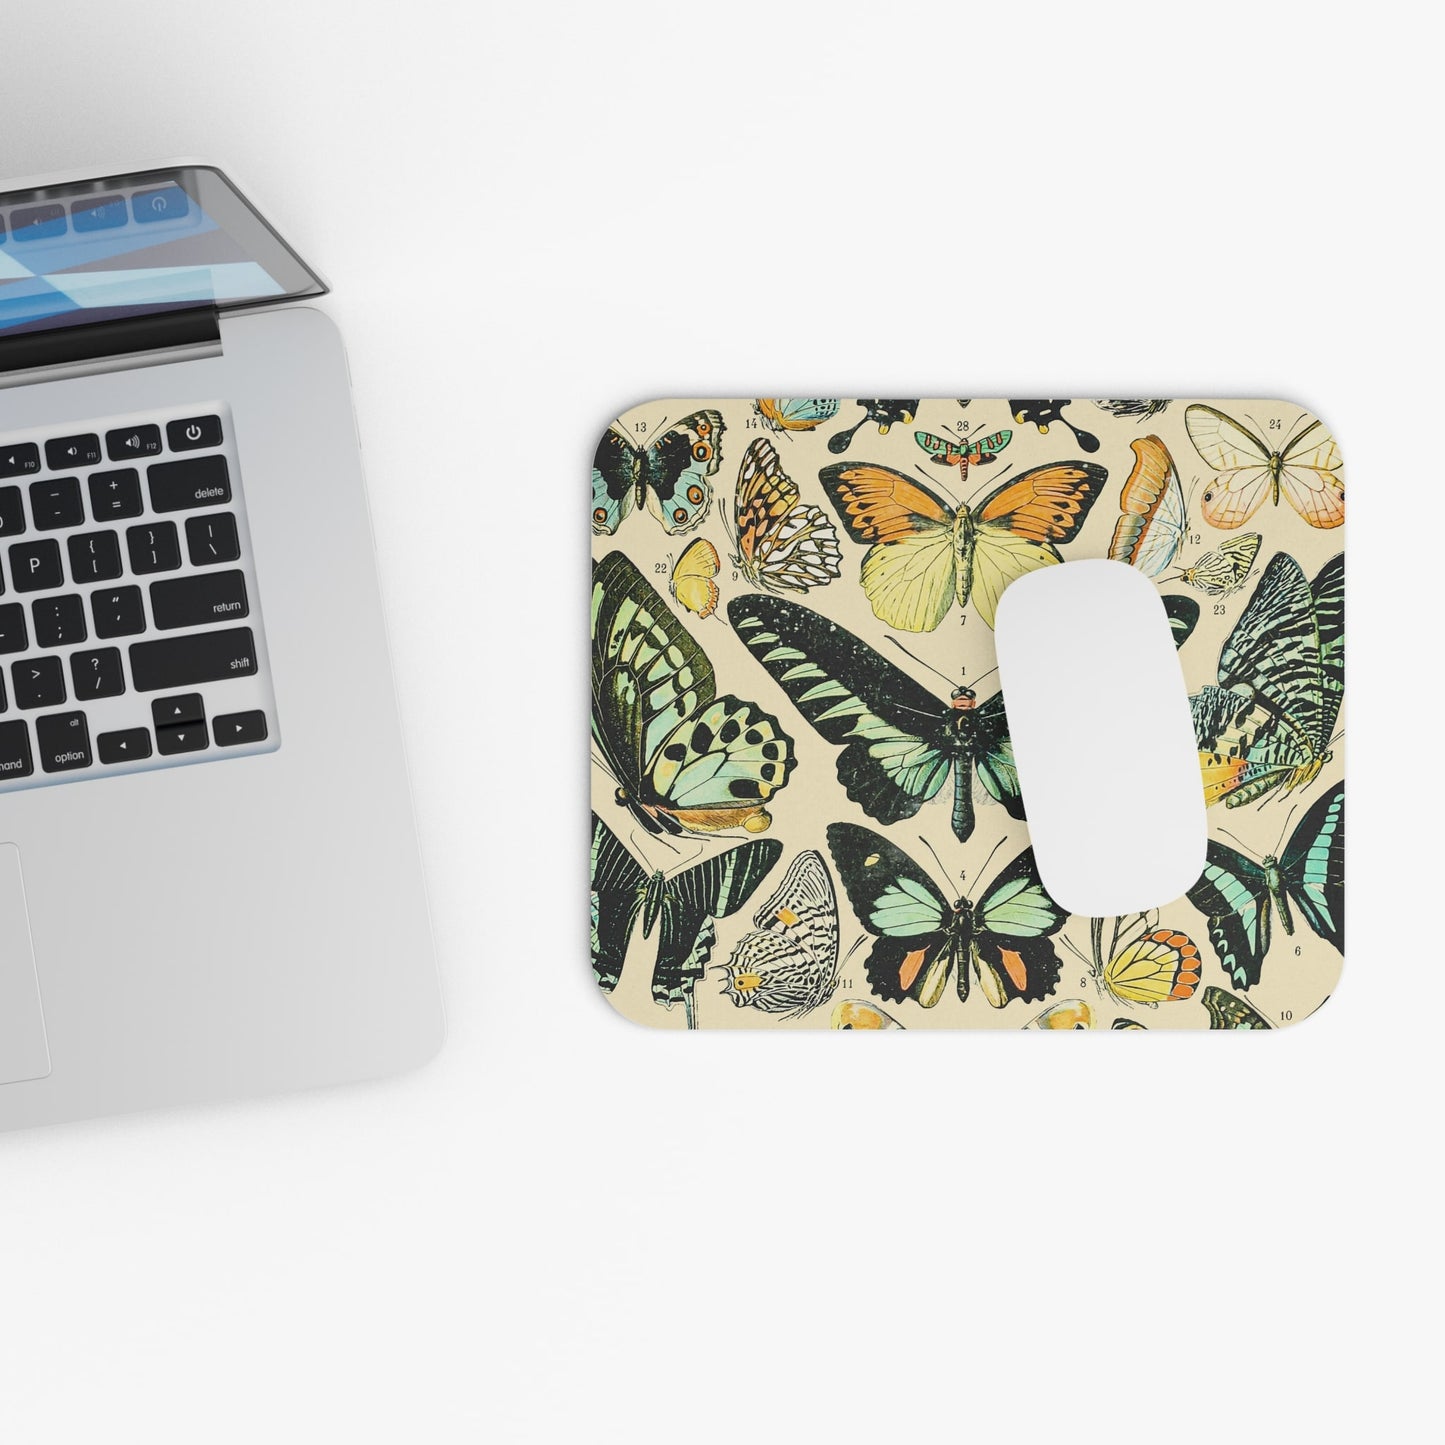 Vintage Butterflies and Moths Design Laptop Mouse Pad with White Mouse